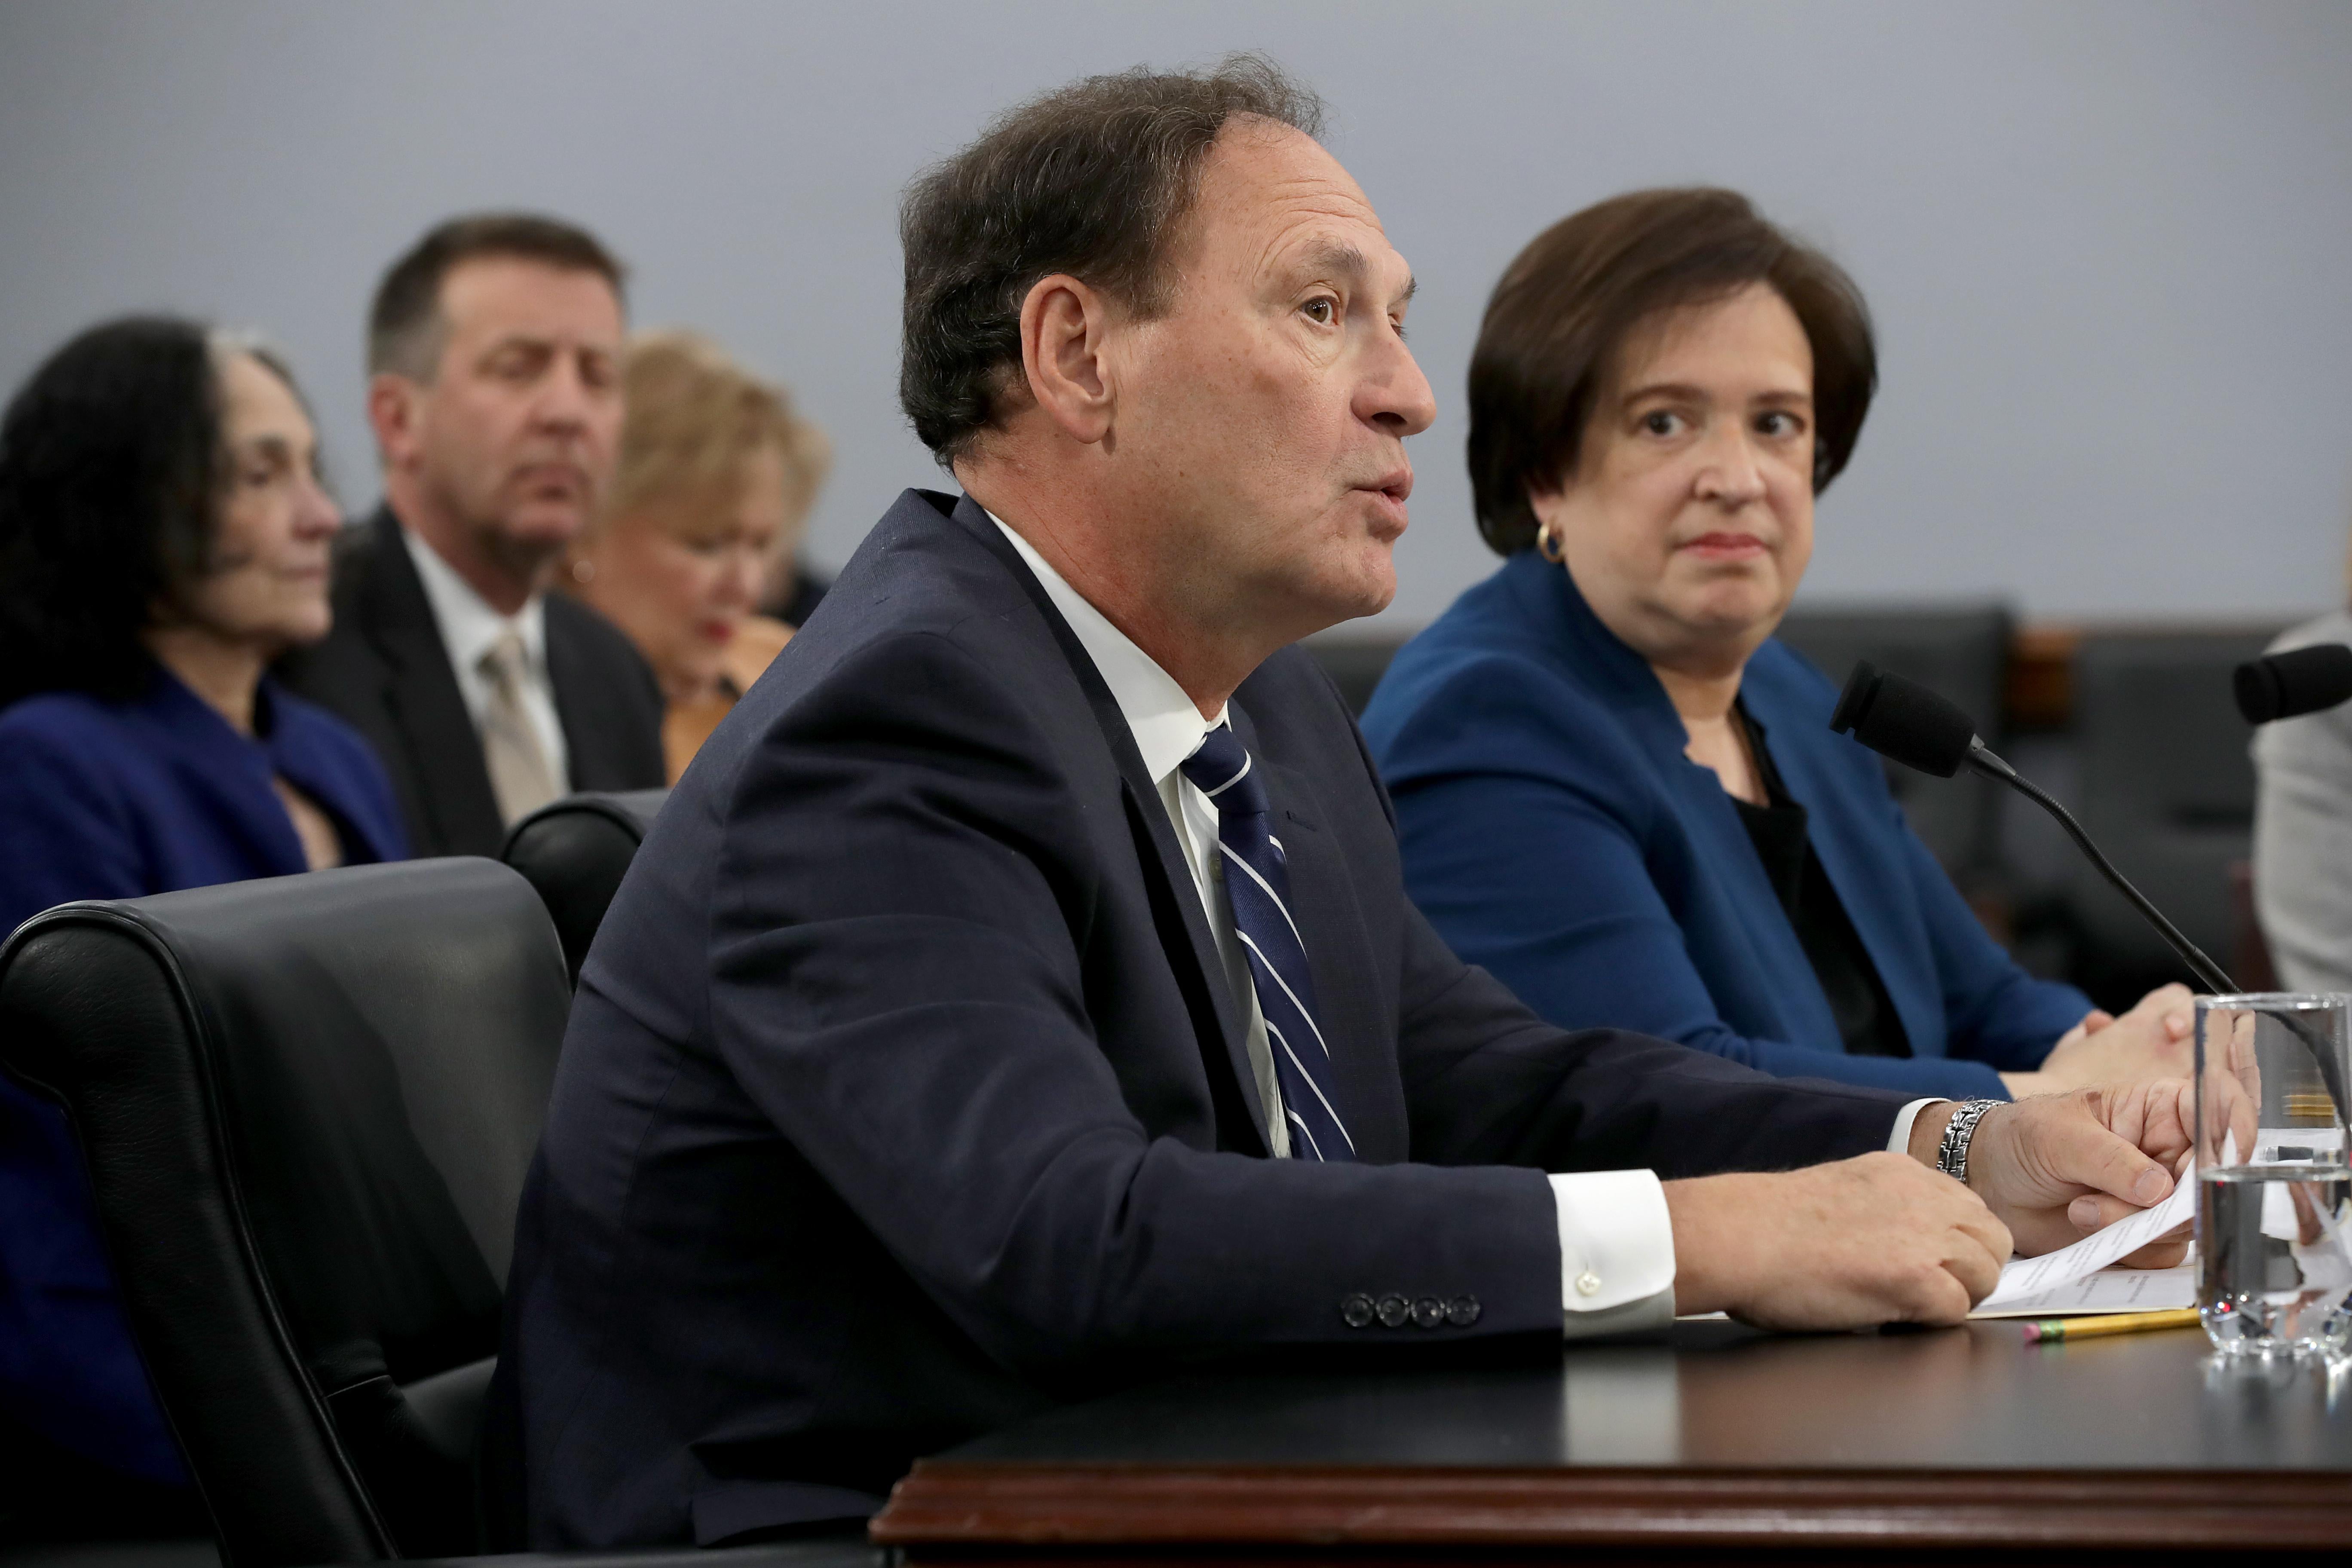 Kagan stares at Alito with a kind of side eye, just like in her Brnovich opinion.